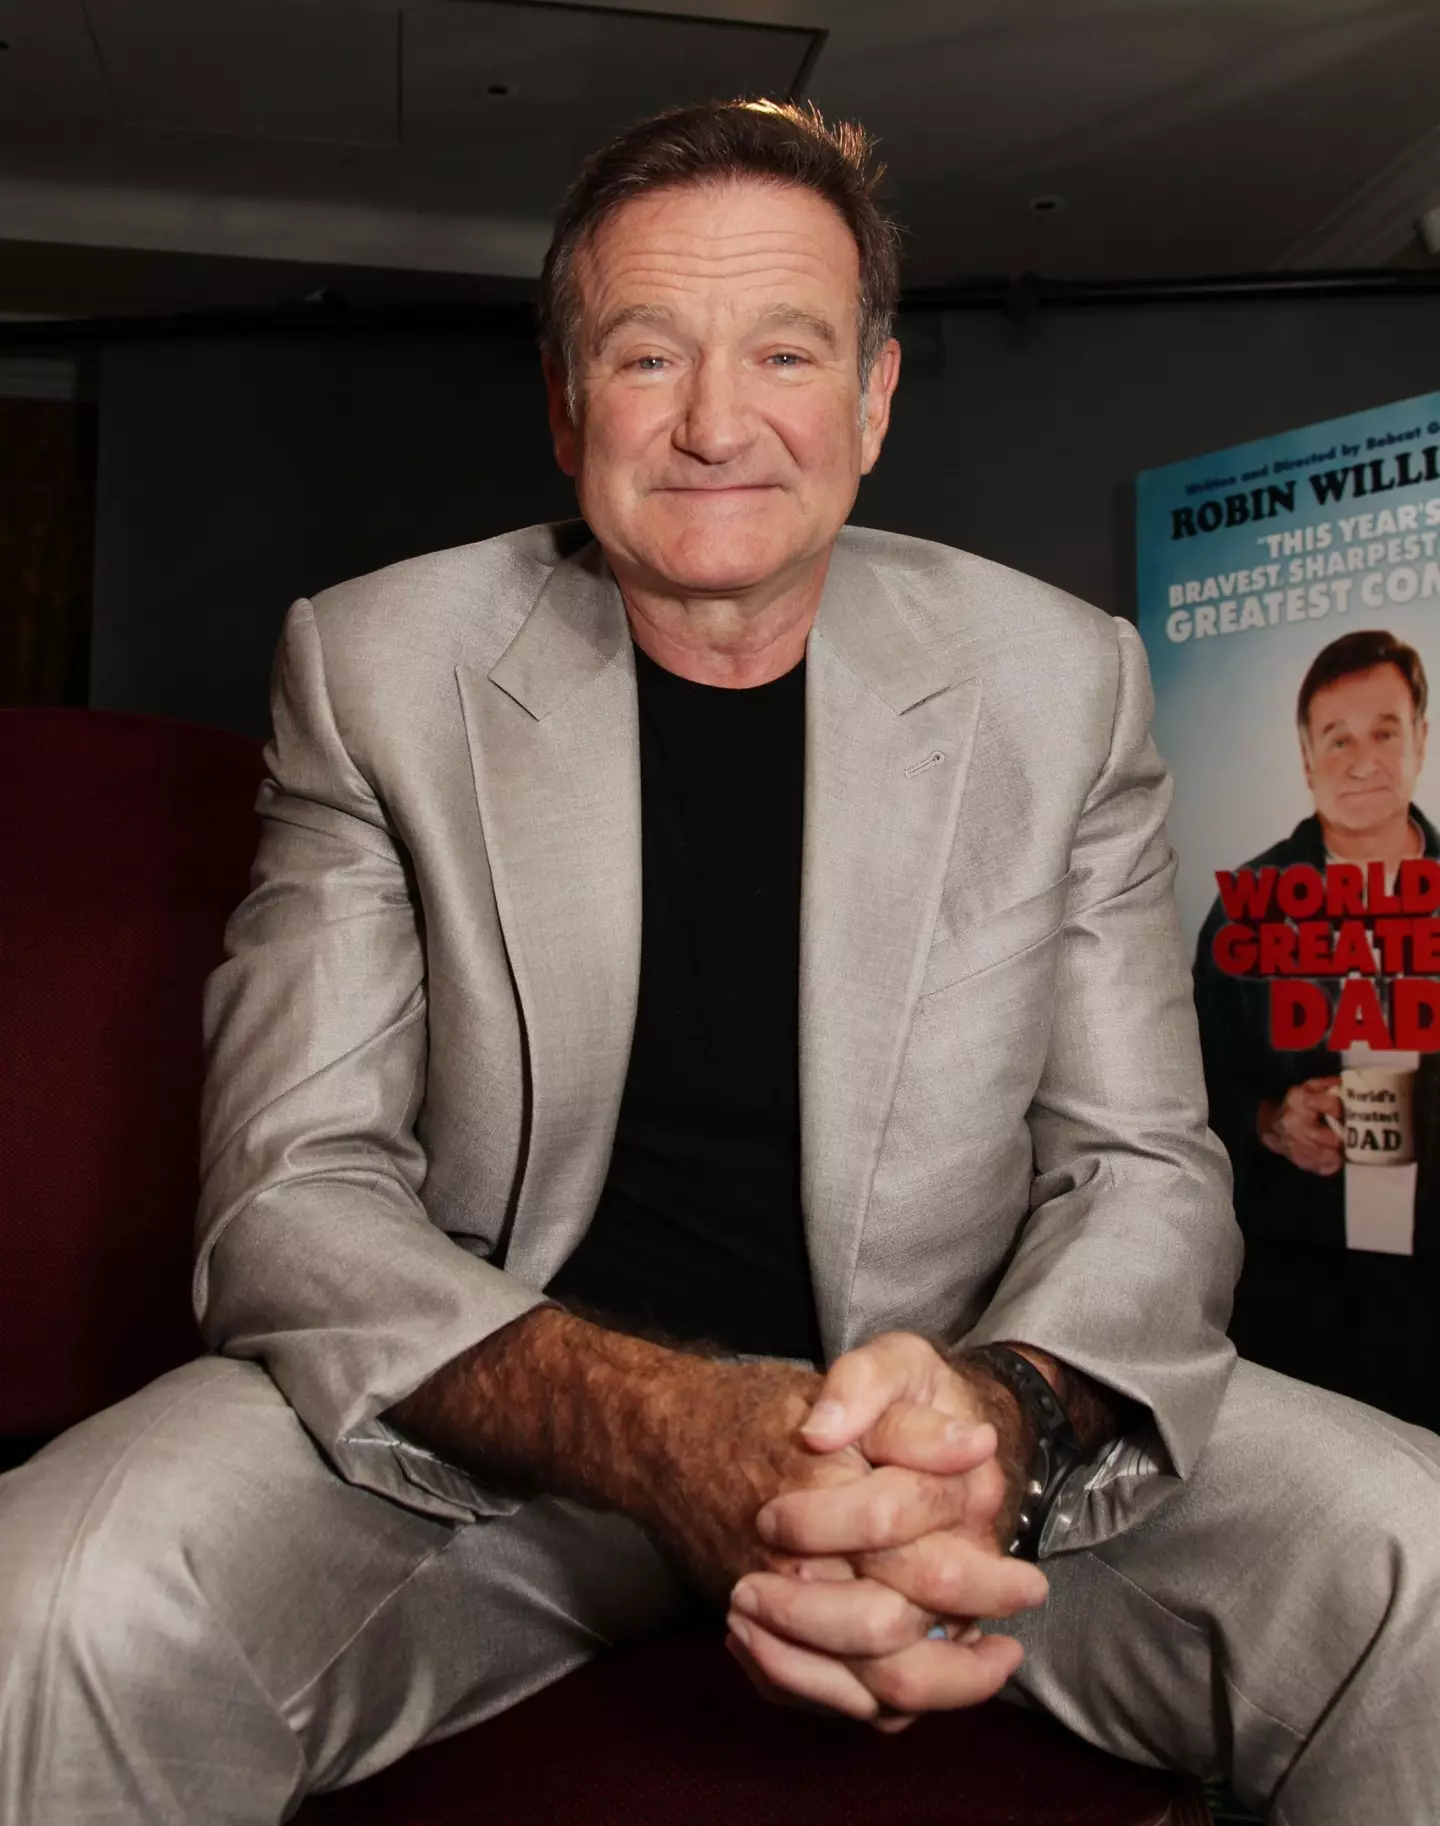 Robin Williams died in 2014.